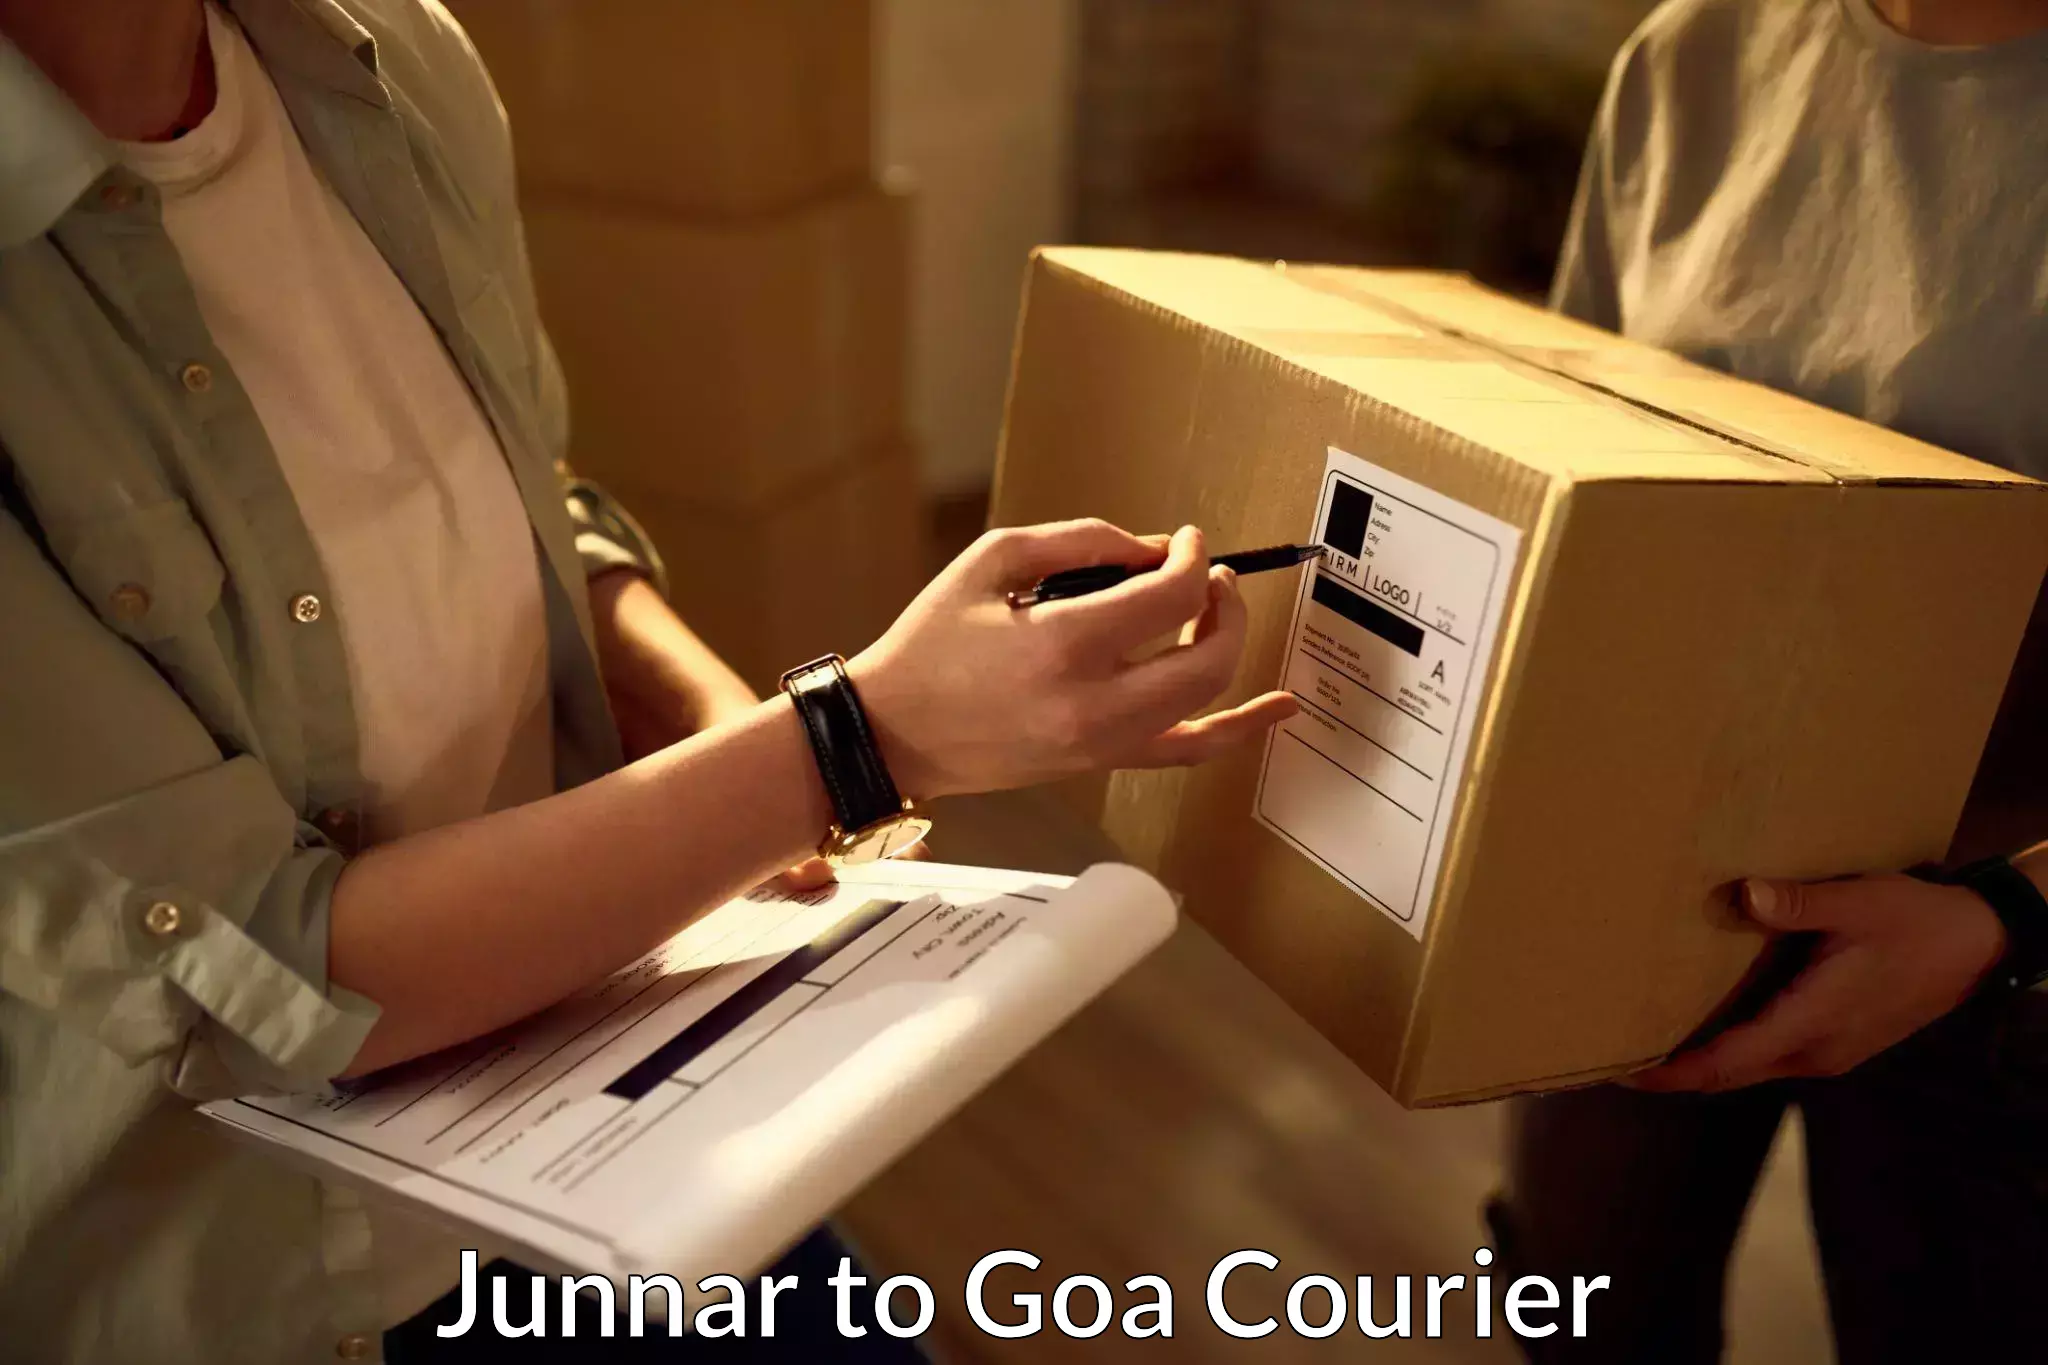 Fast delivery service Junnar to Panjim